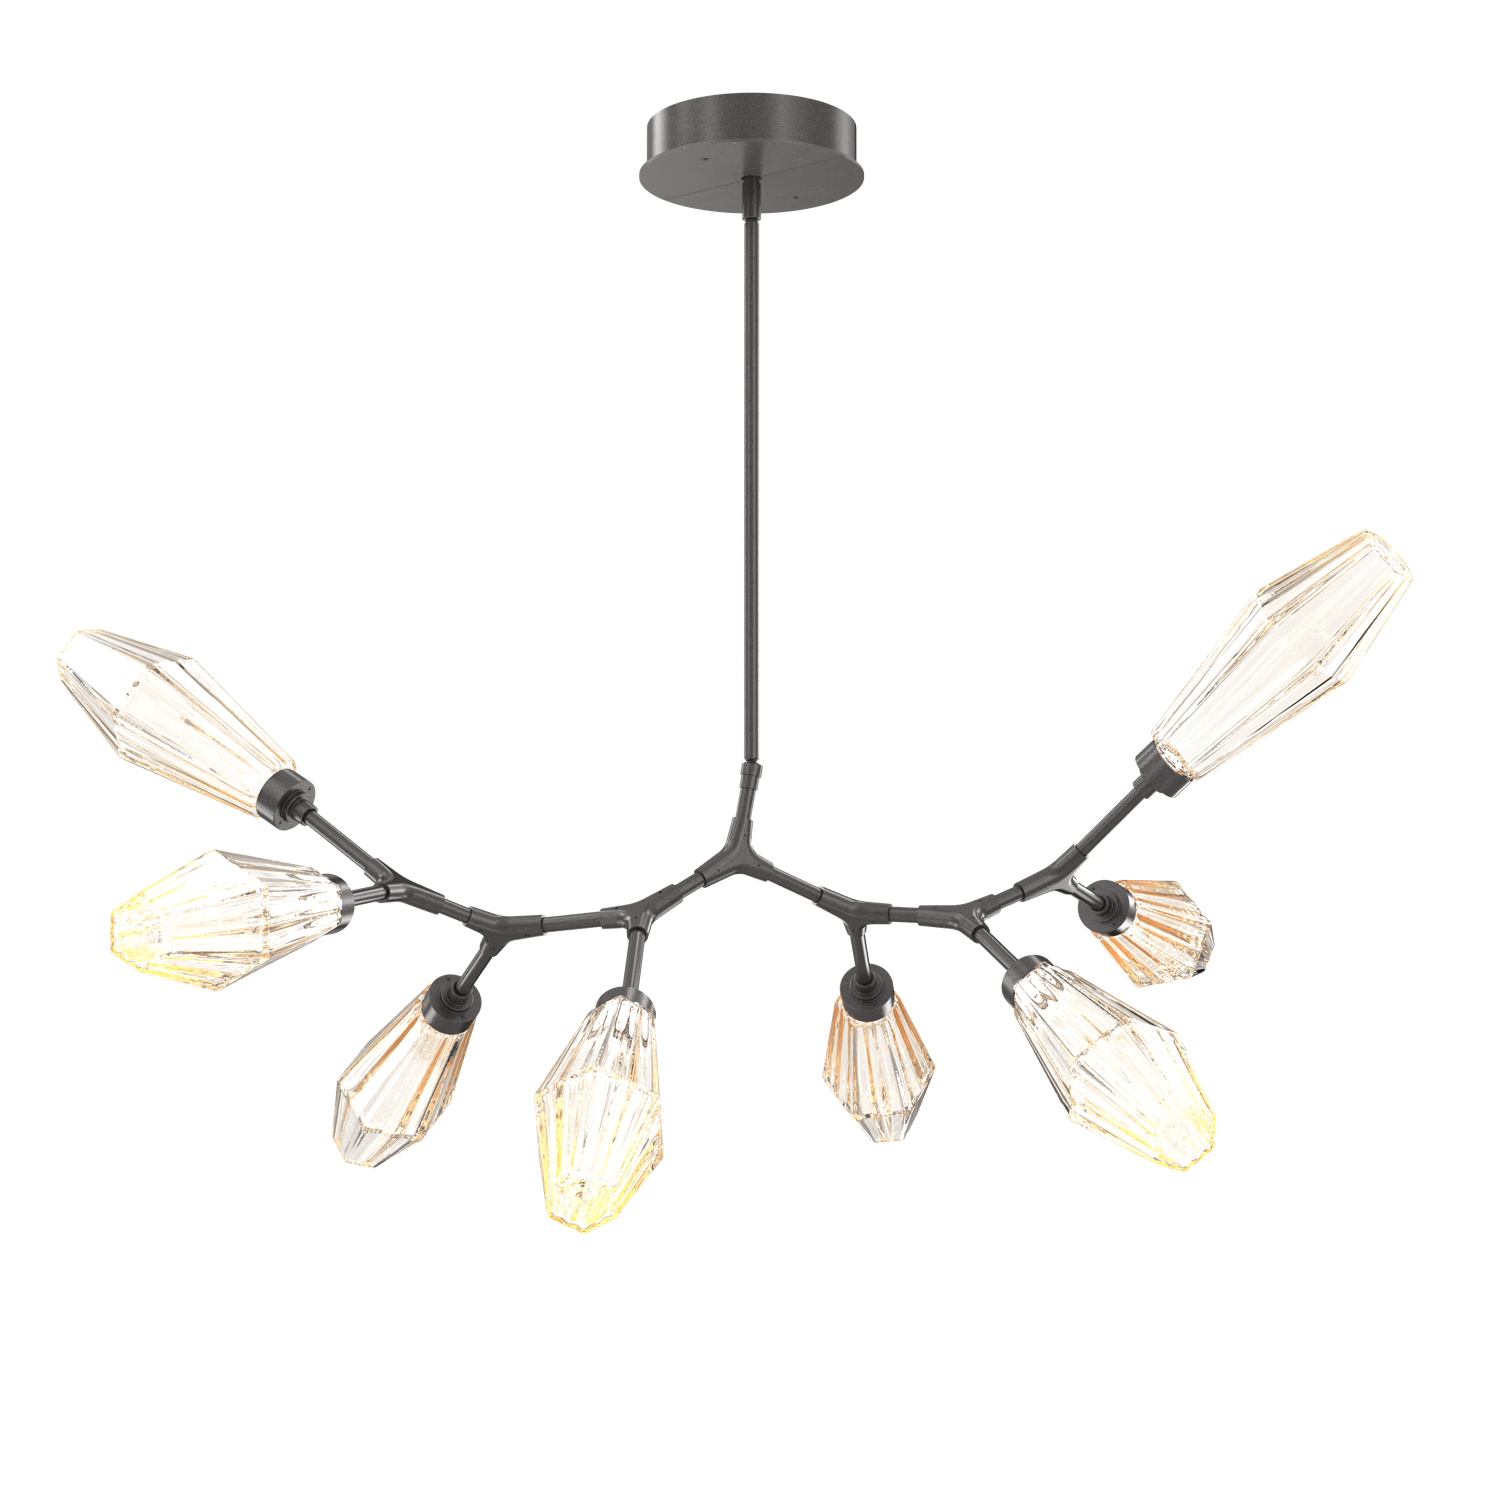 PLB0049-BB-GP-RA-Hammerton-Studio-Aalto-8-light-modern-branch-chandelier-with-graphite-finish-and-optic-ribbed-amber-glass-shades-and-LED-lamping